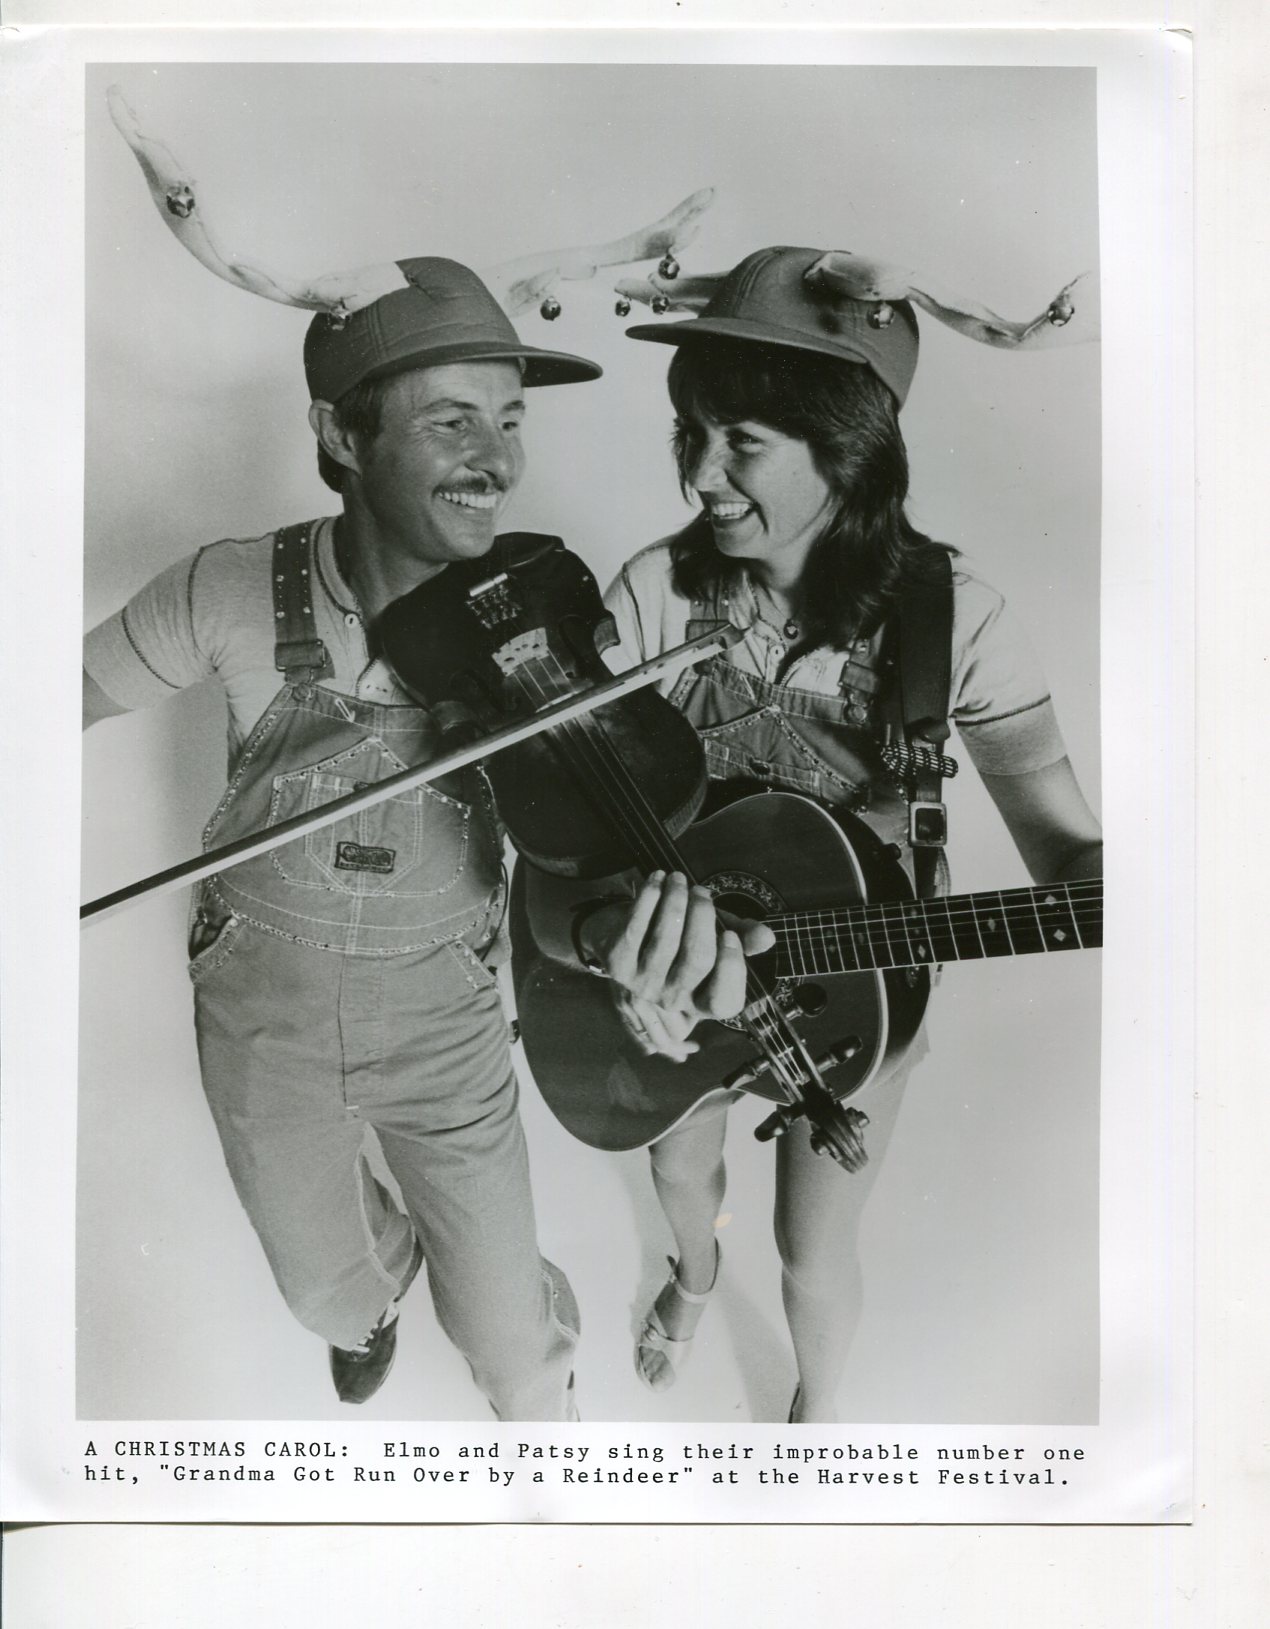 Tranquility indstudering Skinne Elmo & Patsy-Music Duo-Harvest Festival-8x10-B&W: Photograph | DTA  Collectibles